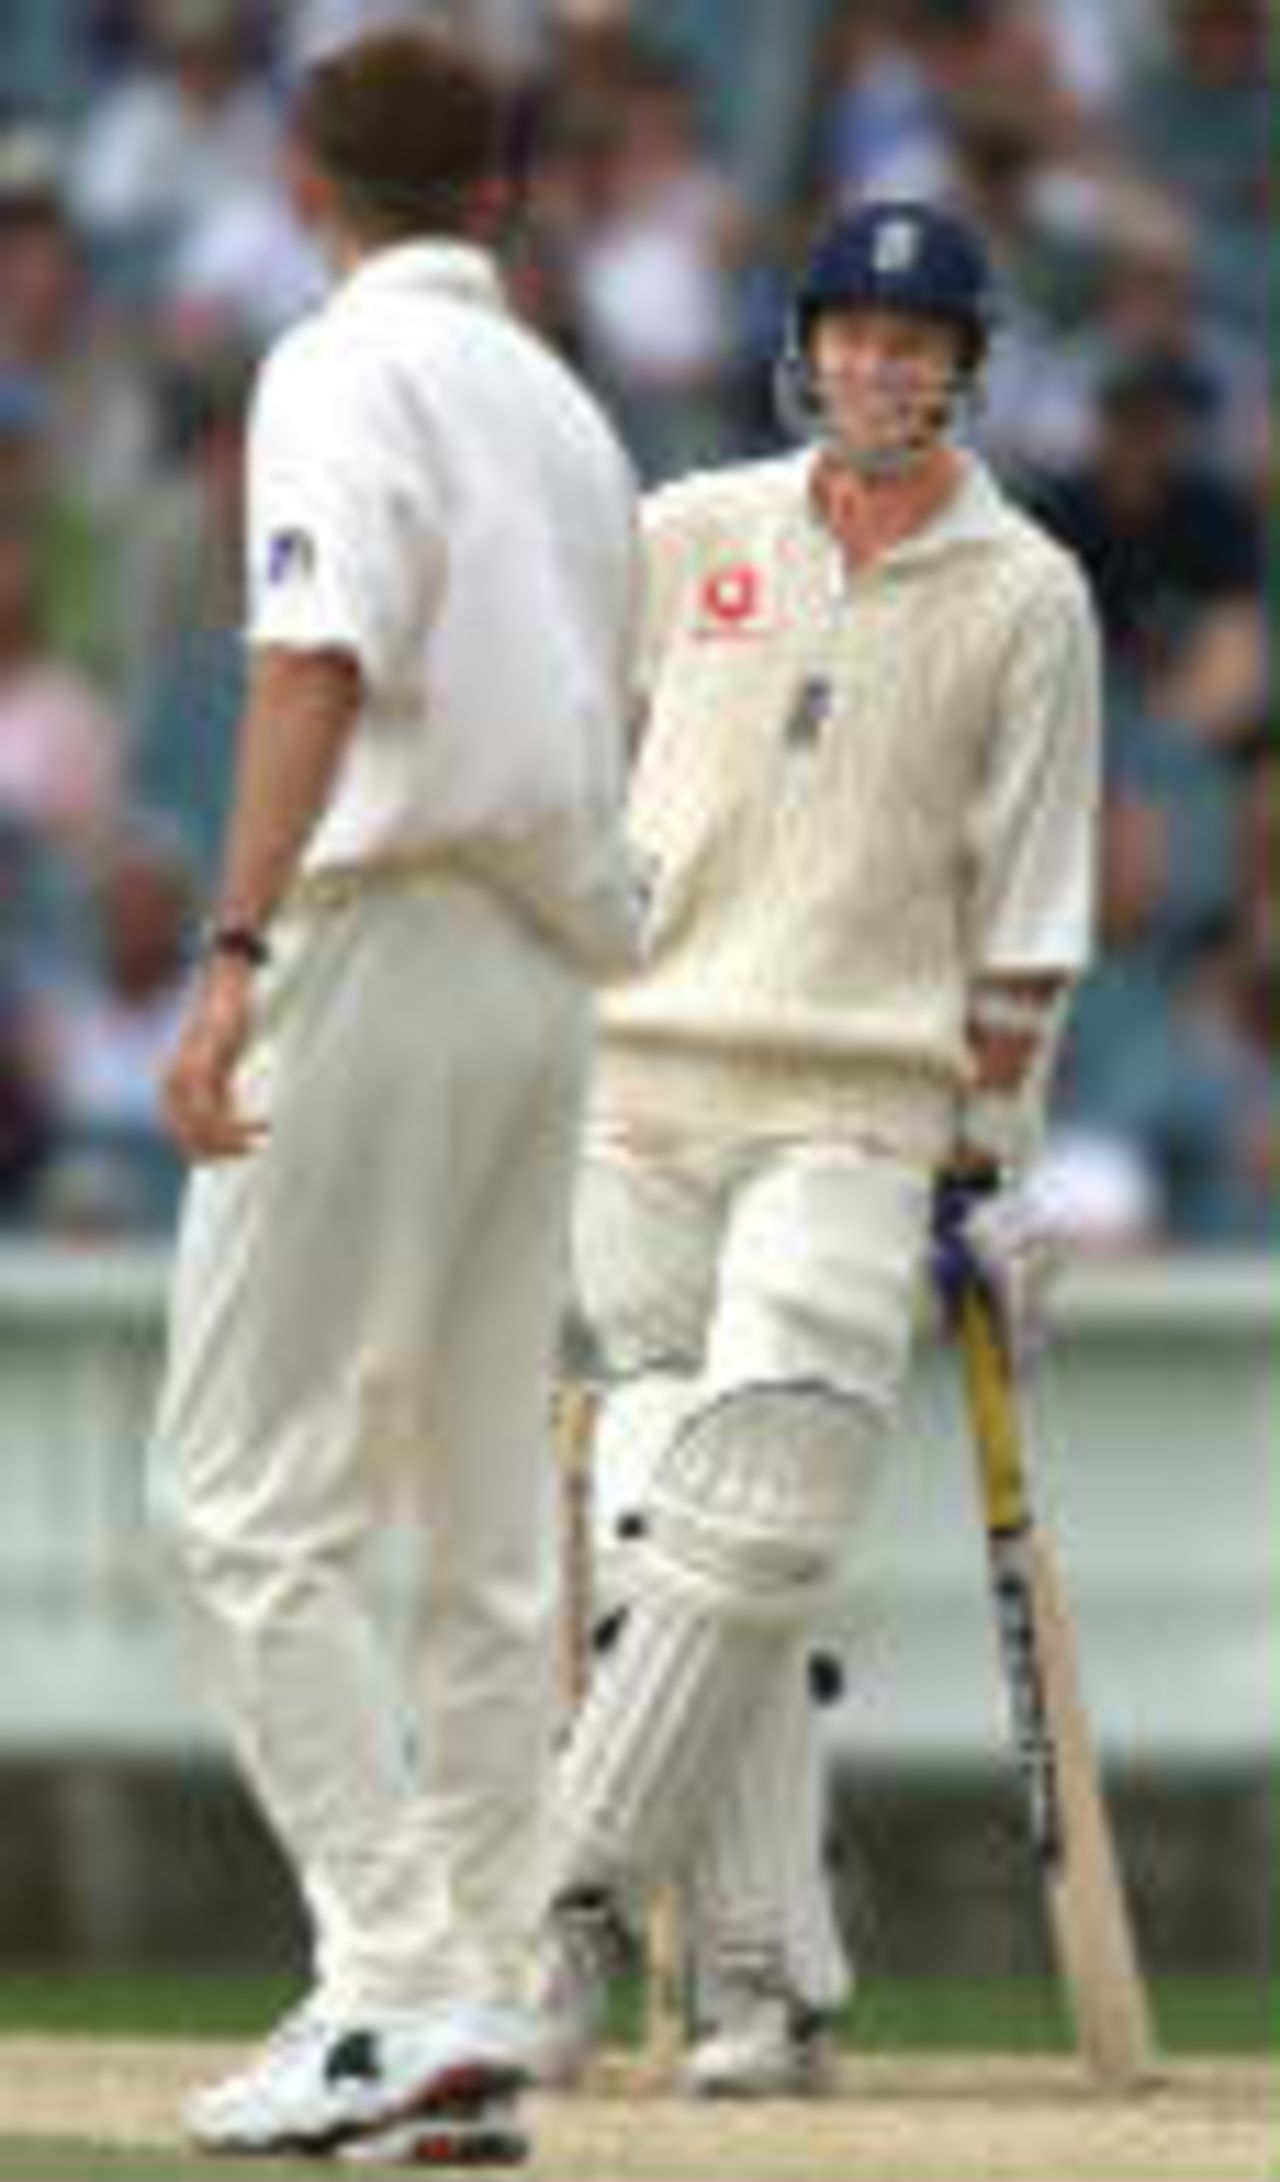 Mullally exchanges pleasantries with McGrath - The Ashes, 1998/99, 4th Test Australia v England Melbourne Cricket Ground 29 December 1998